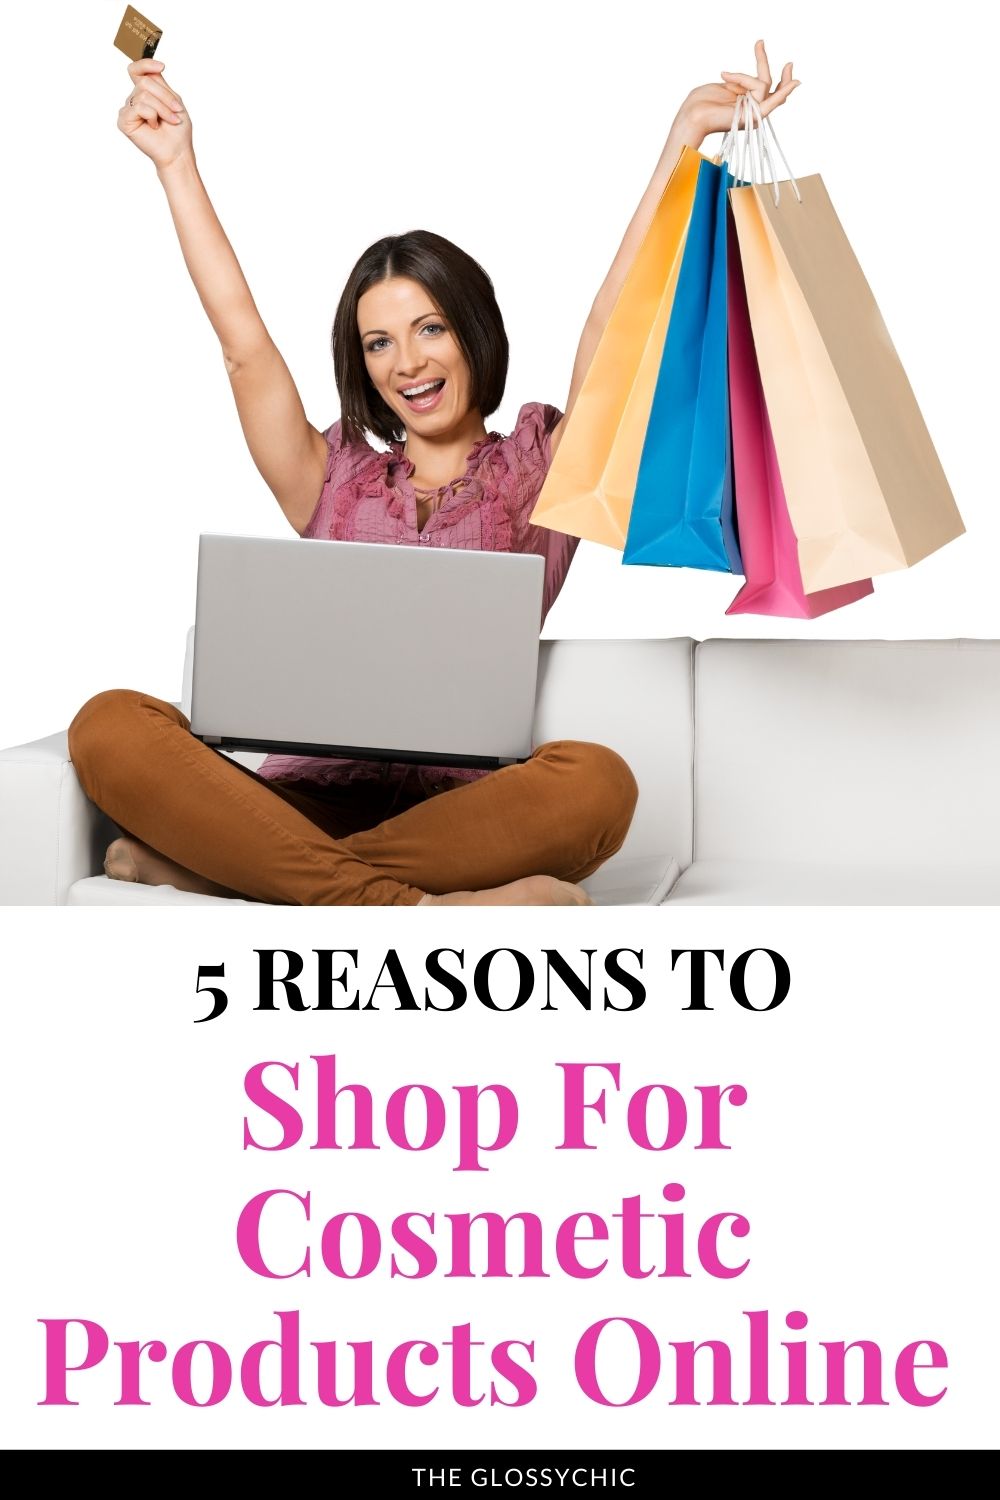 Why shop for cosmetic products online